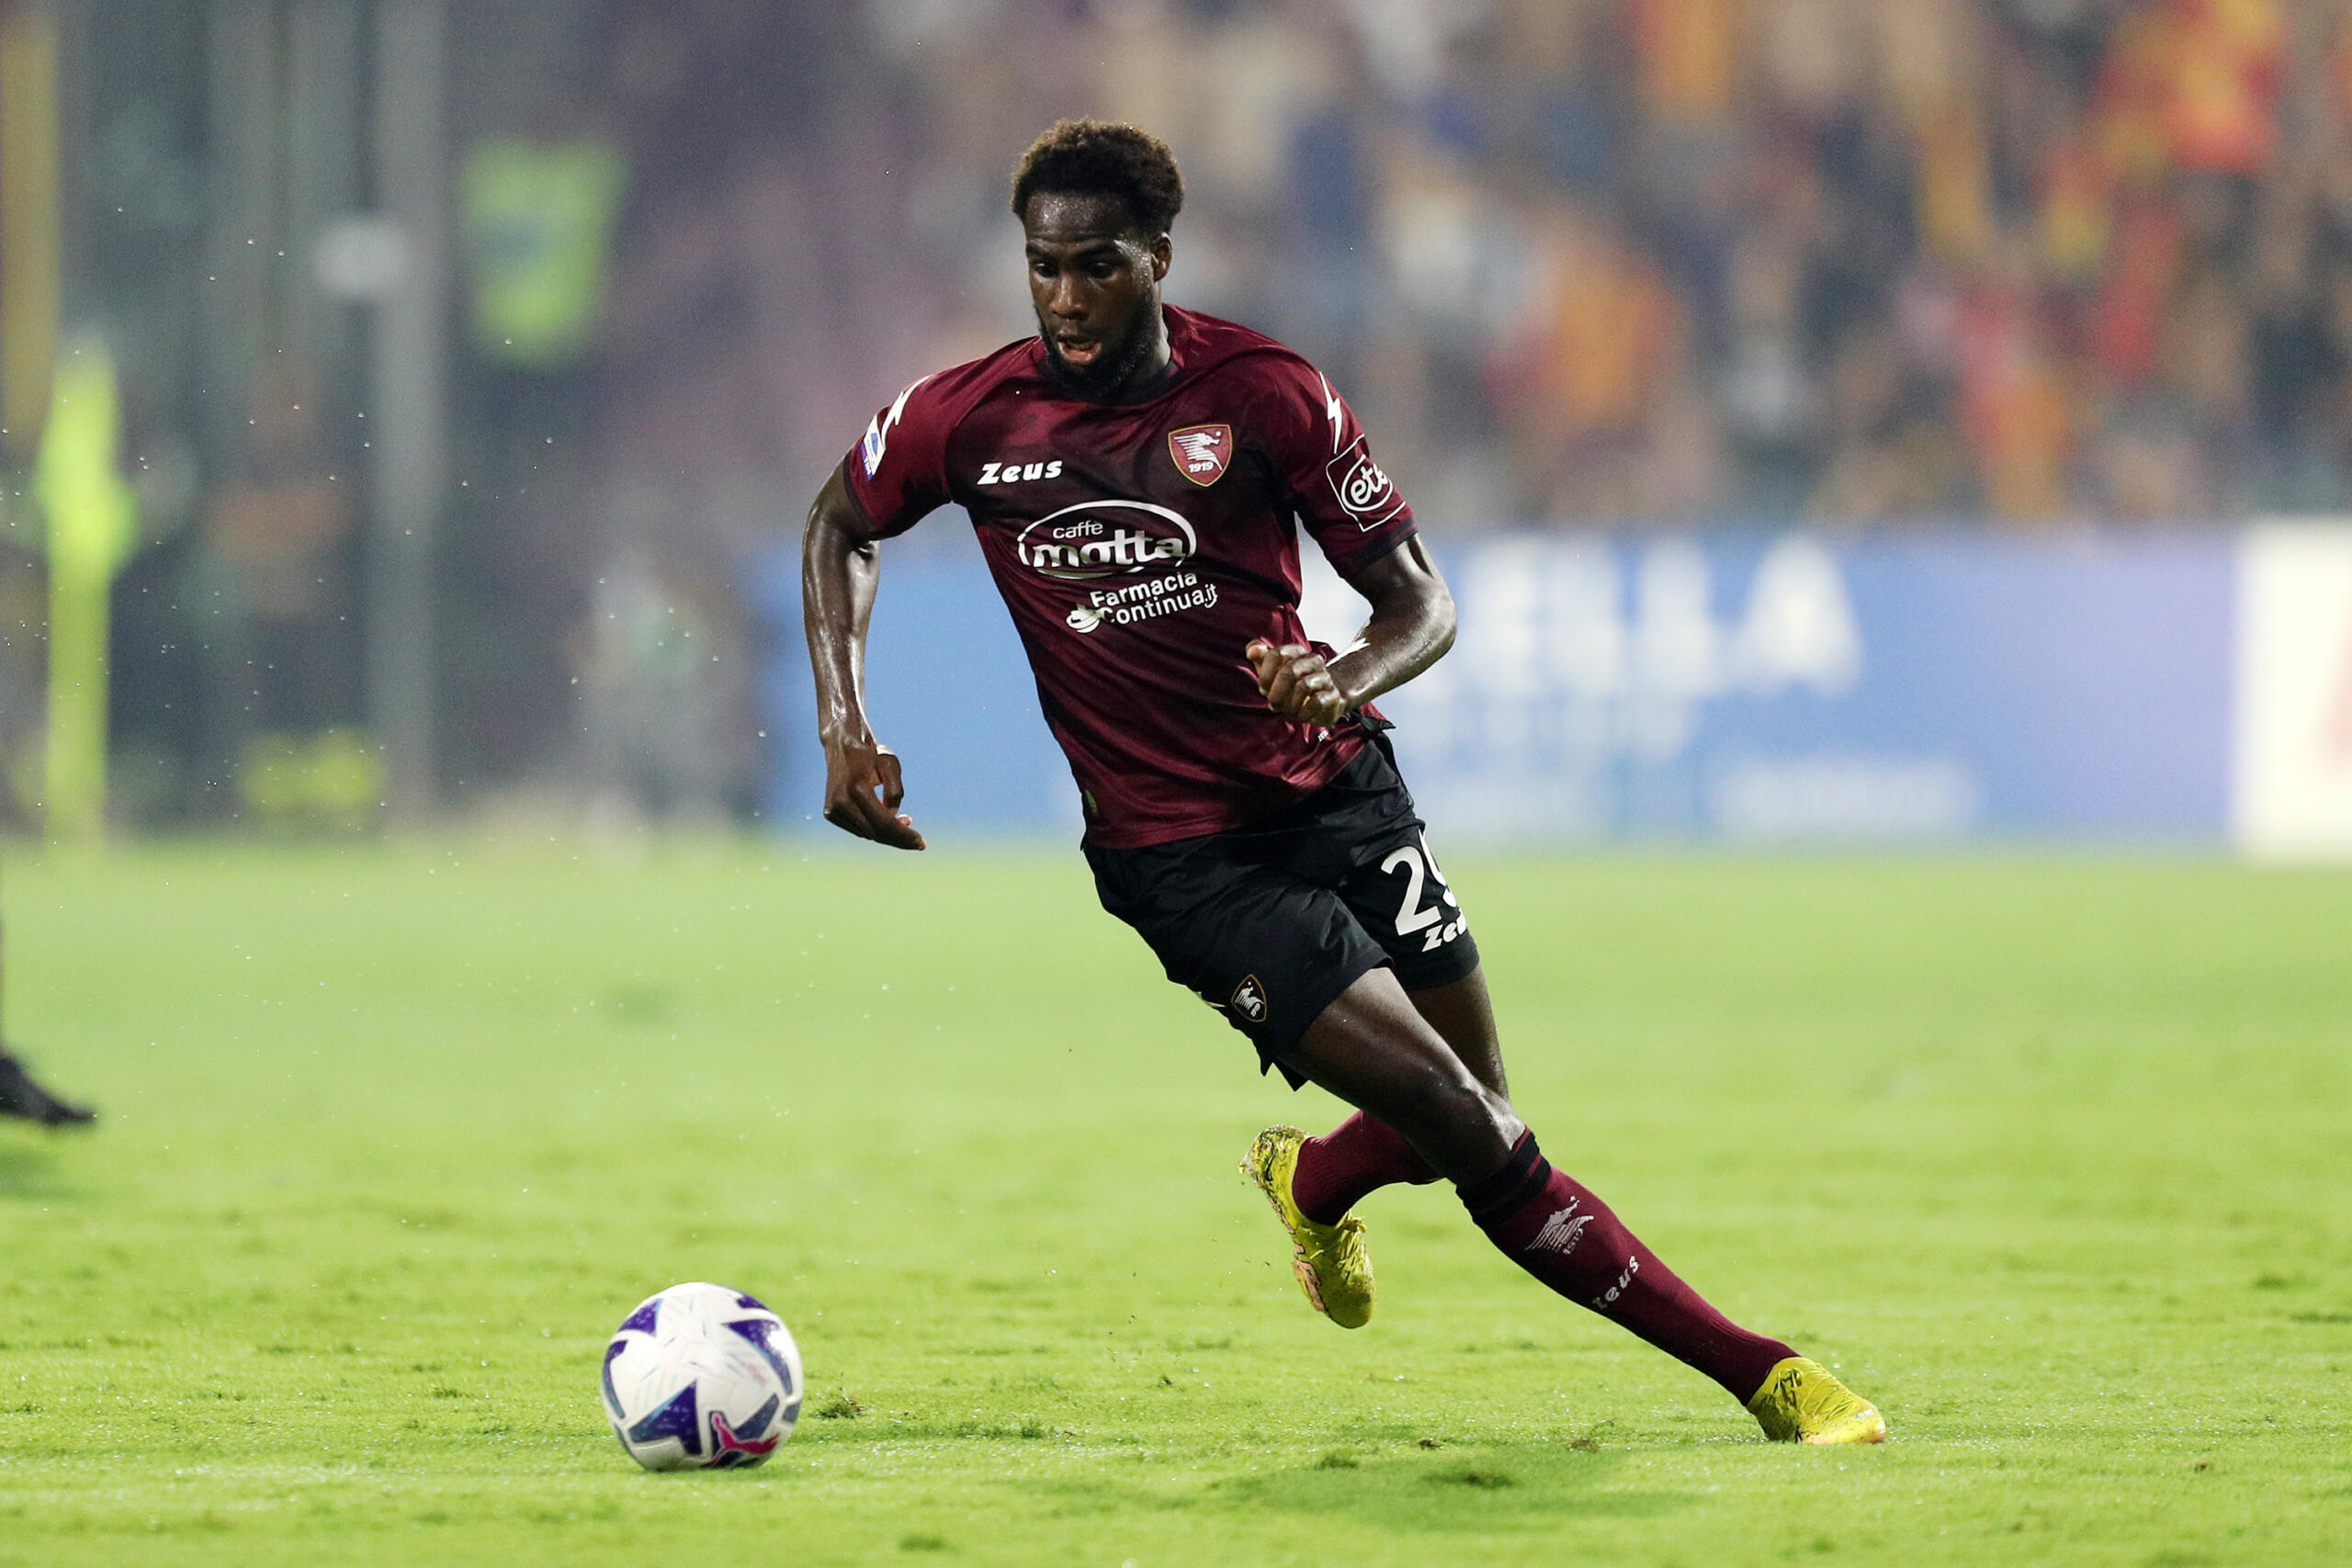 Despite some late drama stemming from an offer from Wolverhampton, Salernitana retained Boulaye Dia last summer, but the problem will return.